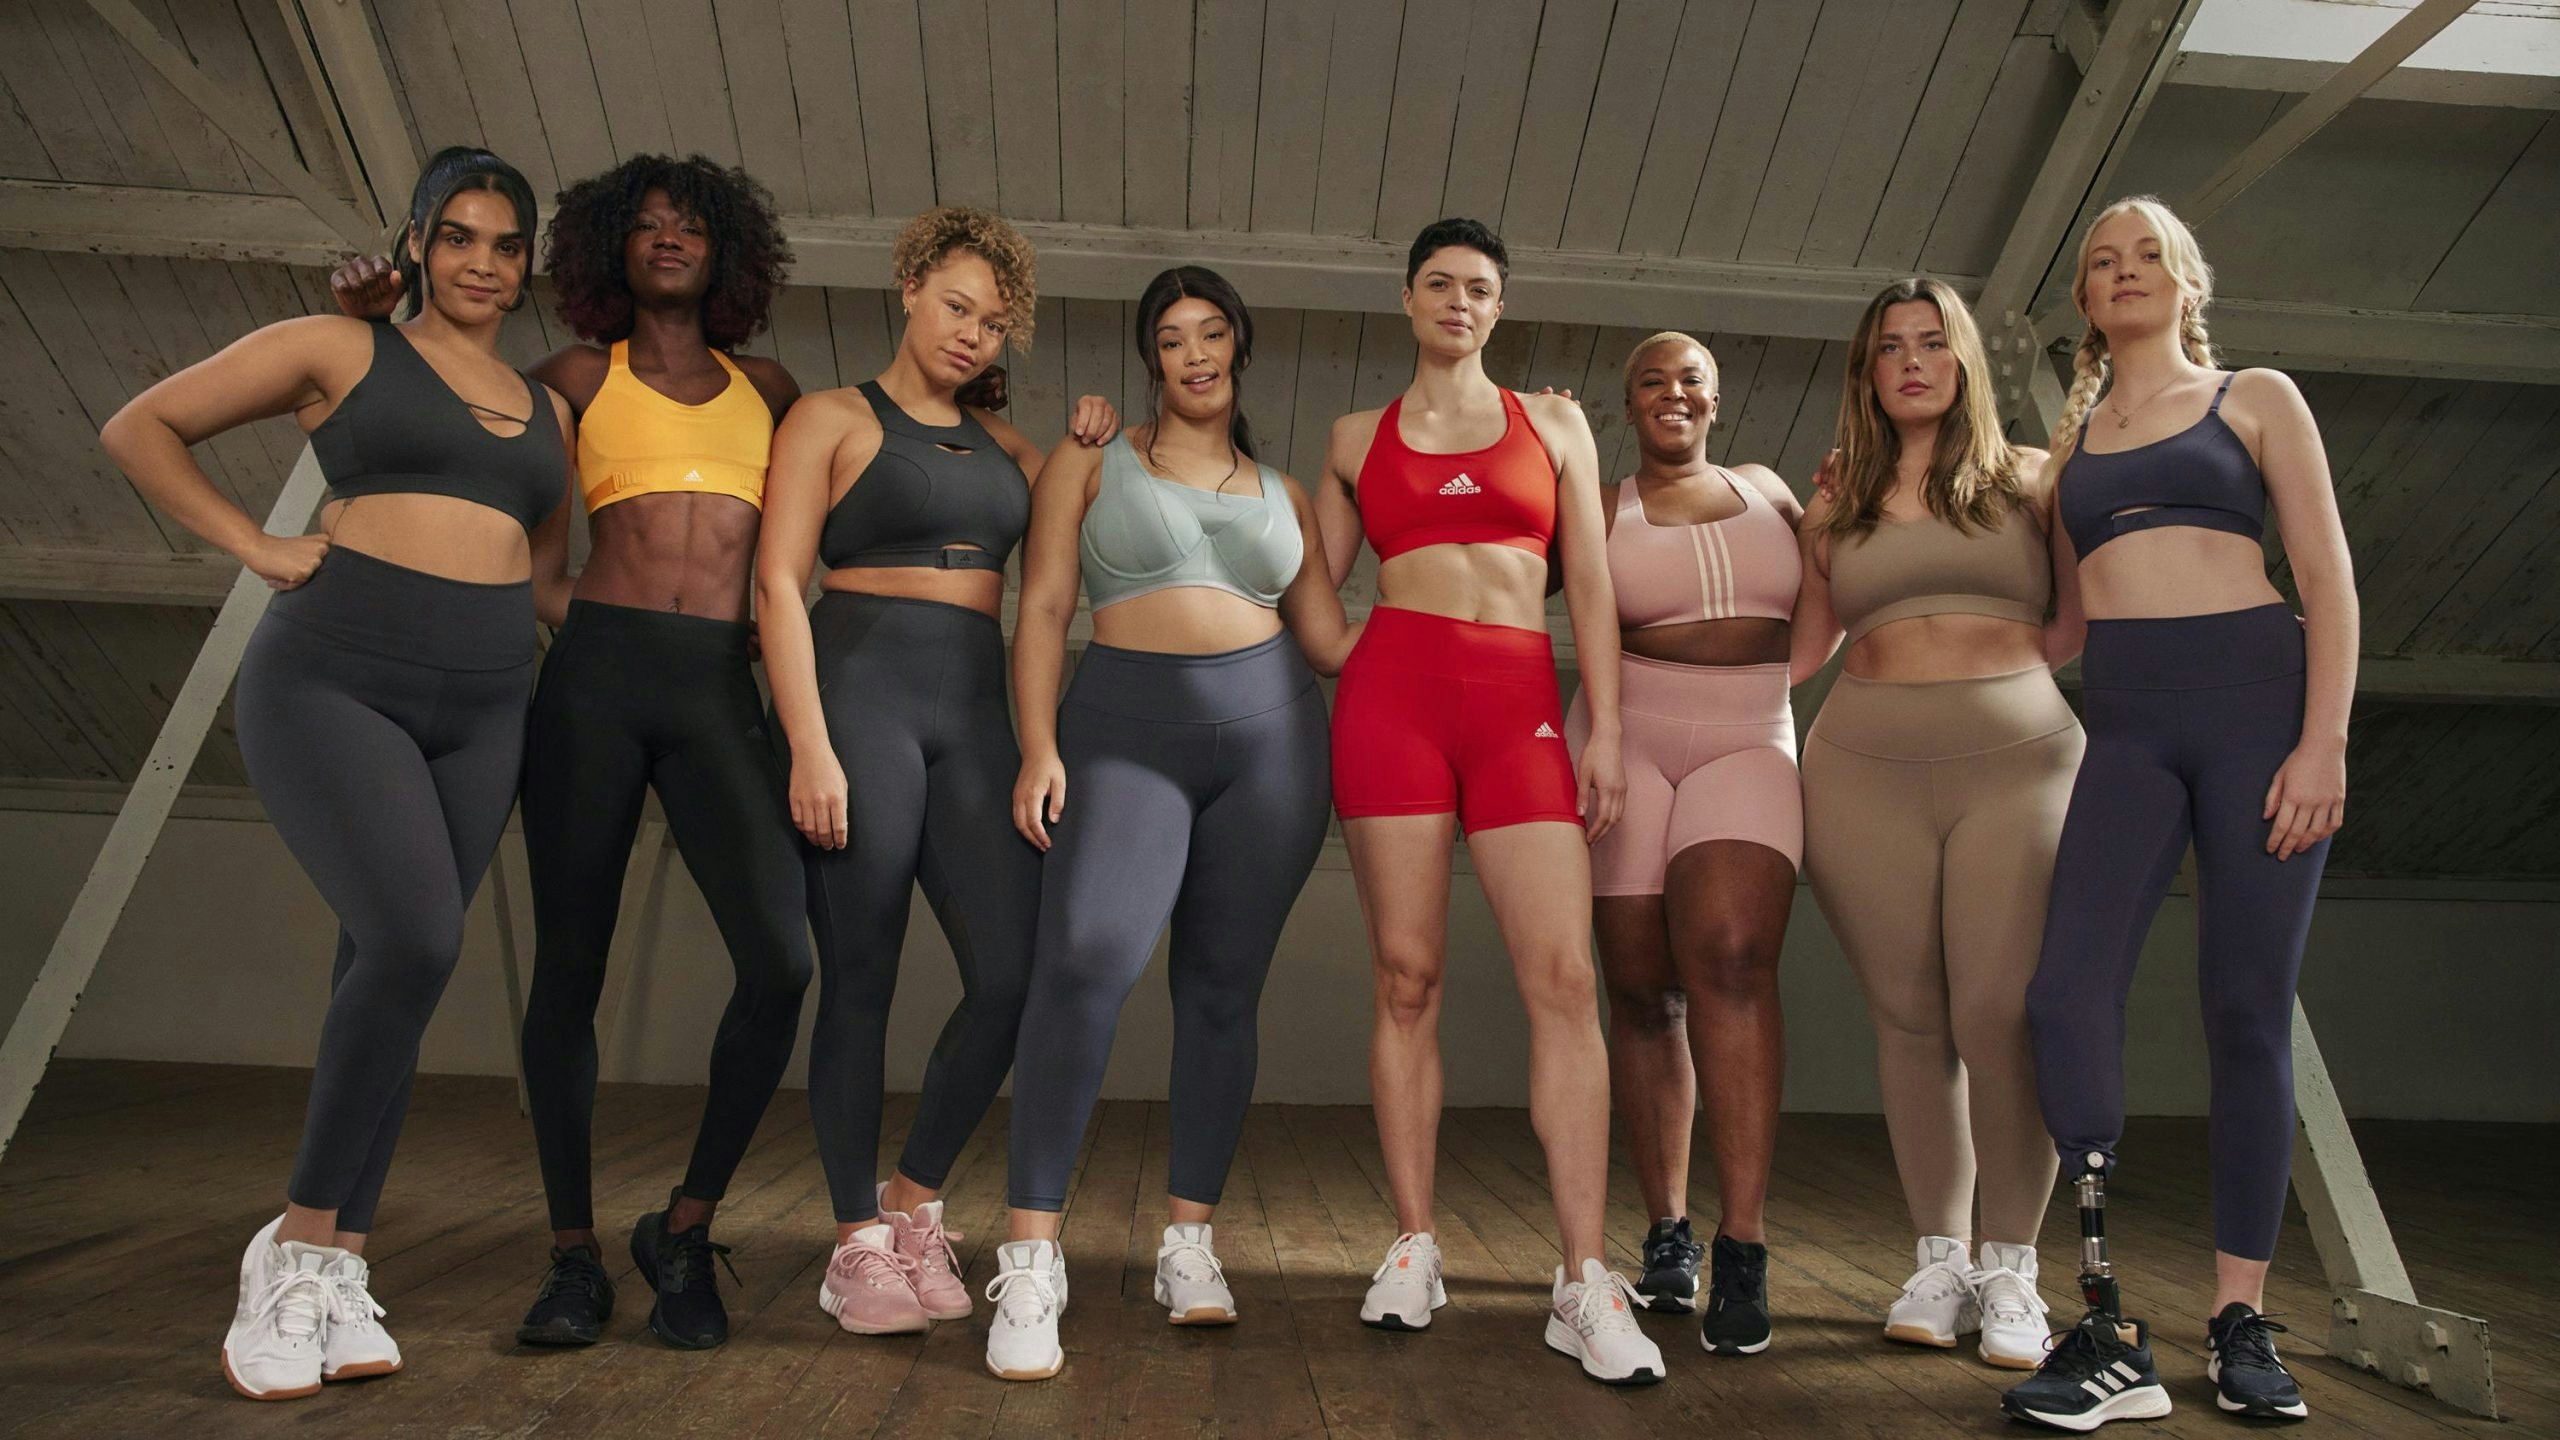 Adidas dove into China’s growing intimates market with its controversial #SupportisEverything campaign. But can it win over customers in this sensitive segment? Photo: Adidas